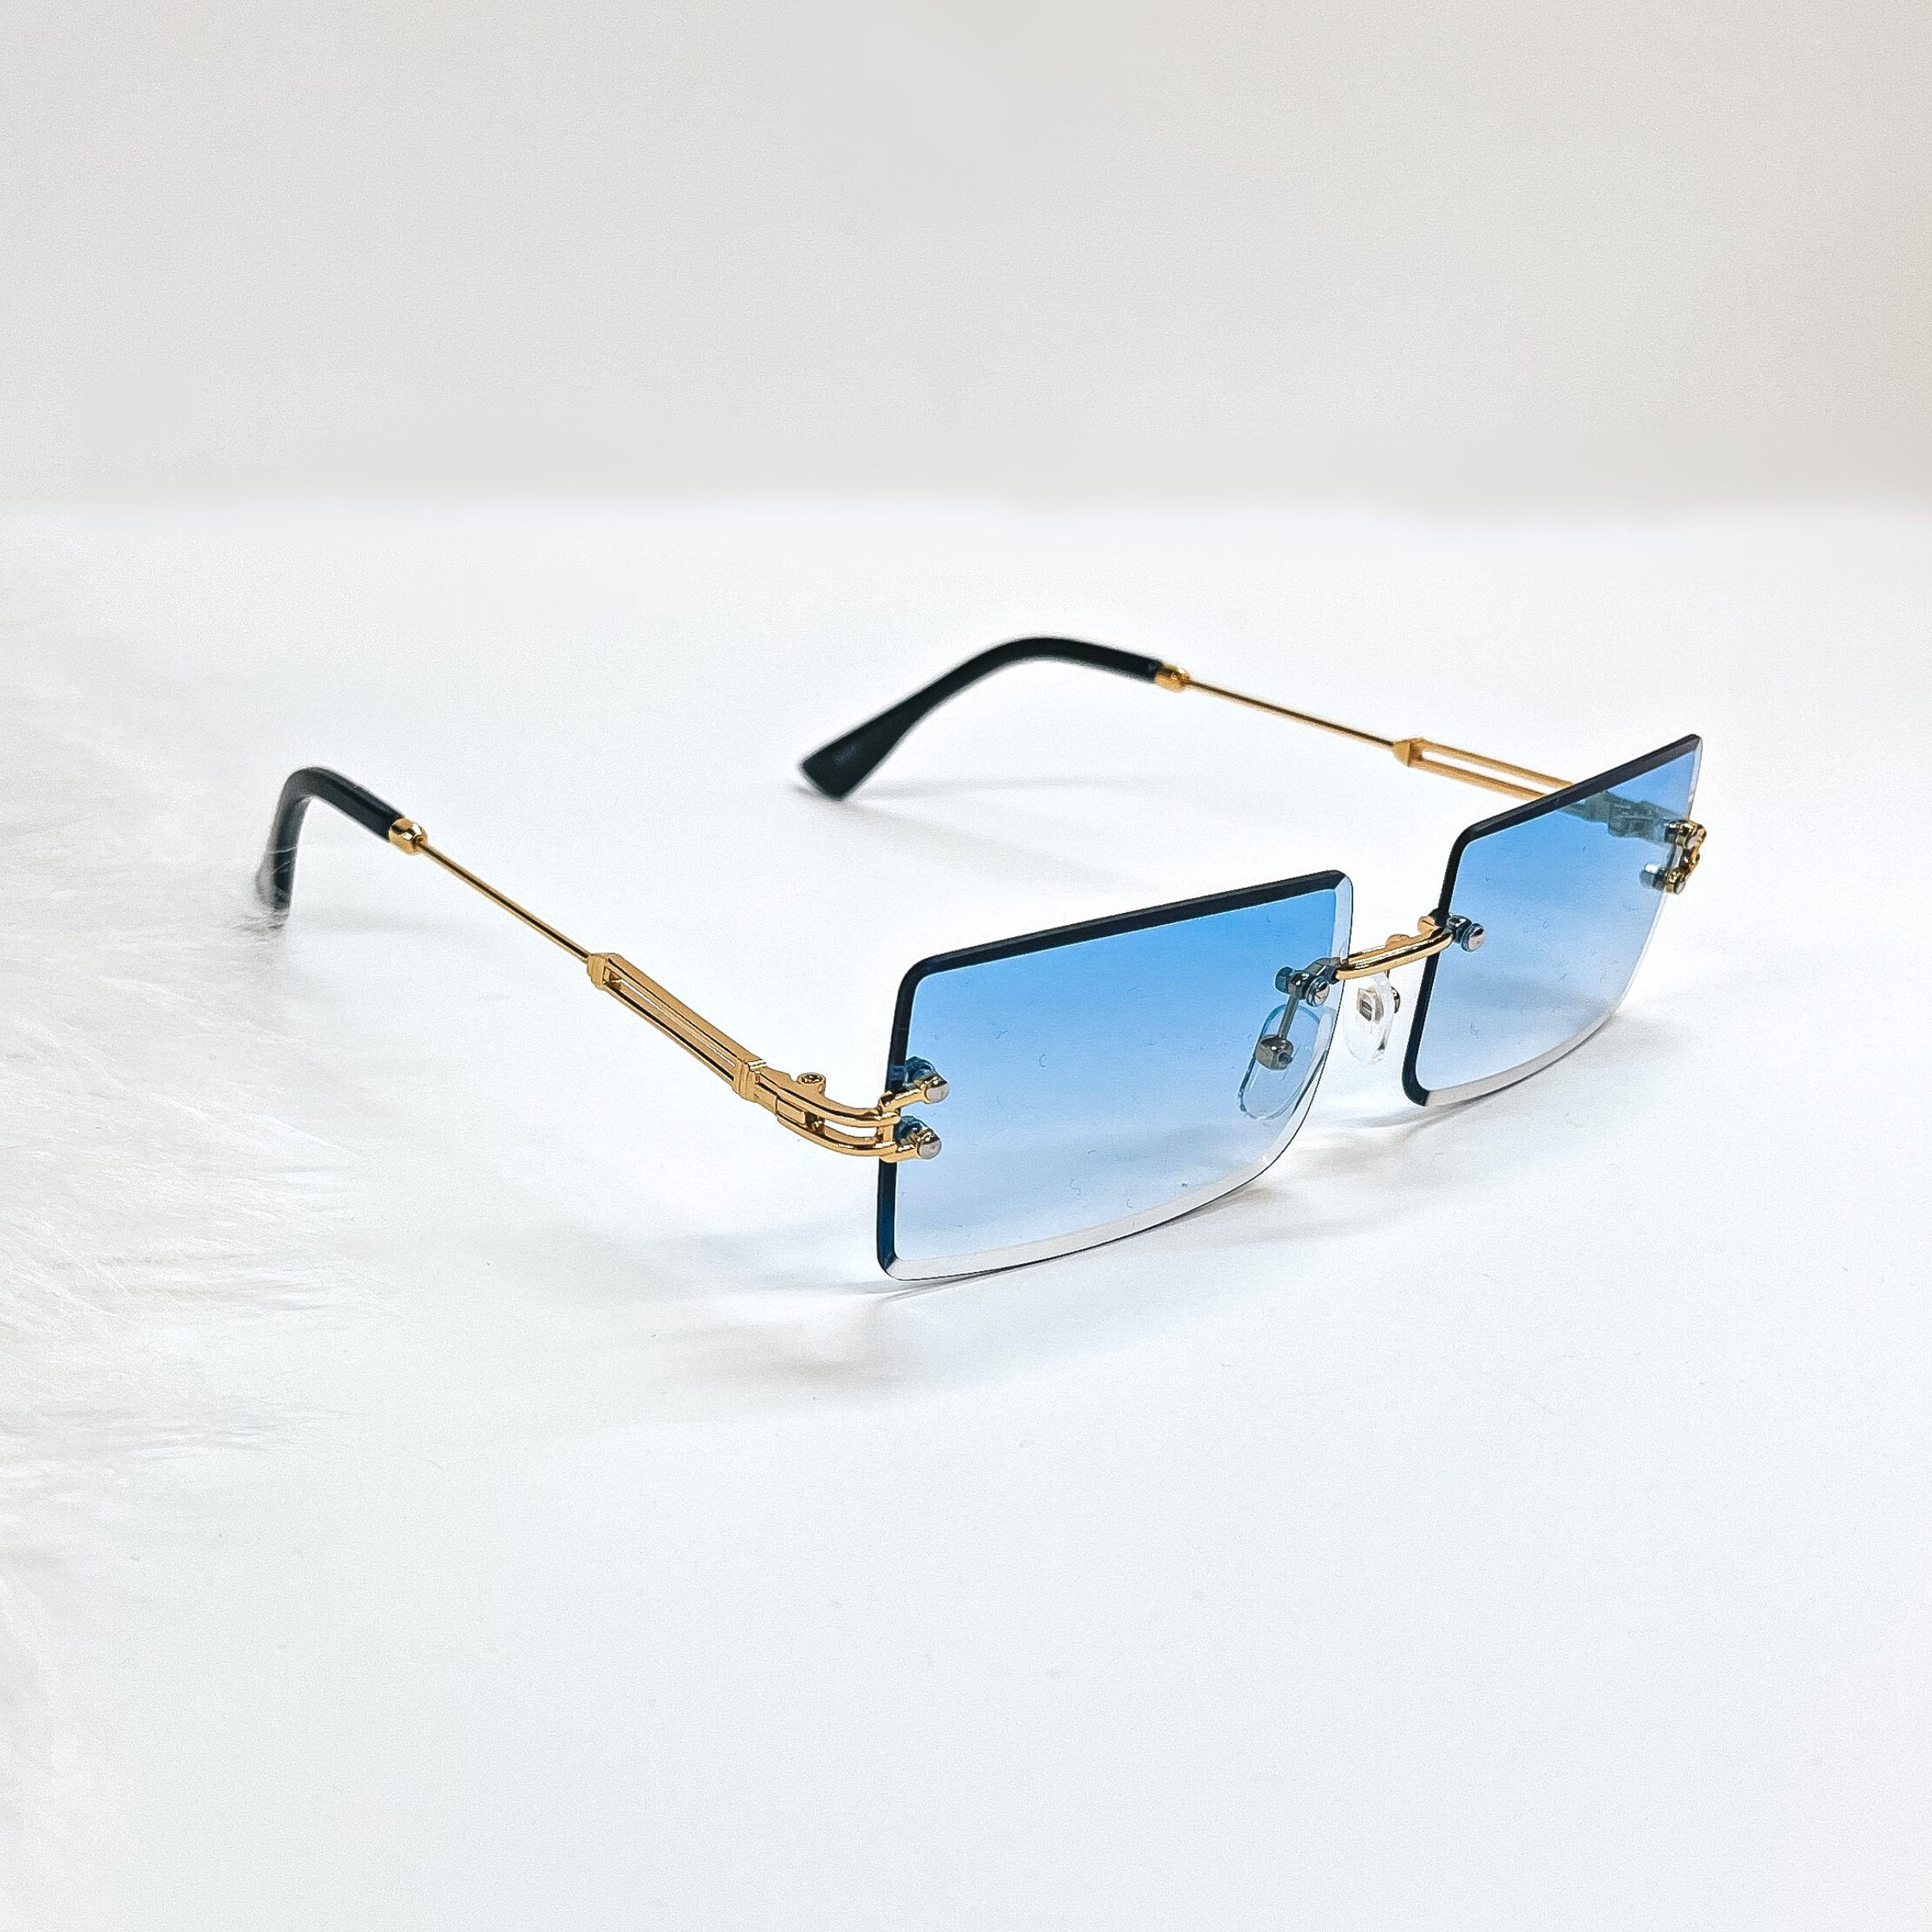 This is a blue pair of sunglasses, the lenses are blue with no frame and they have  gold connectors. The ear pieces are black. These sunglasses are taken  on a white background with a piece of white fur in the side as decor.